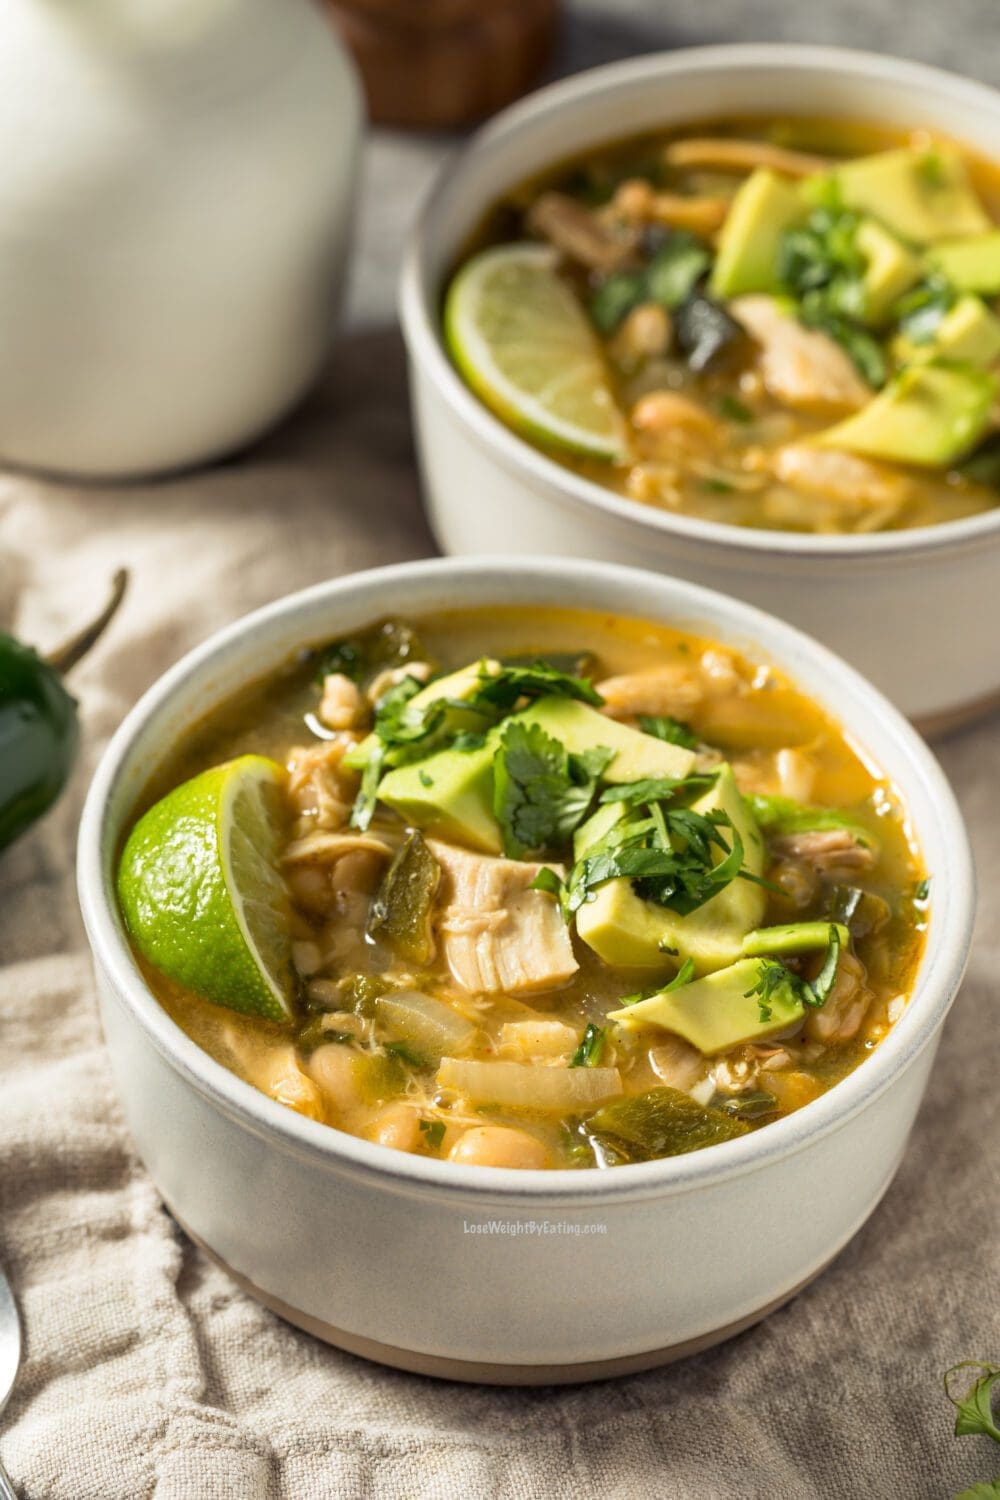 Low Calorie White Chicken Chili - Lose Weight By Eating